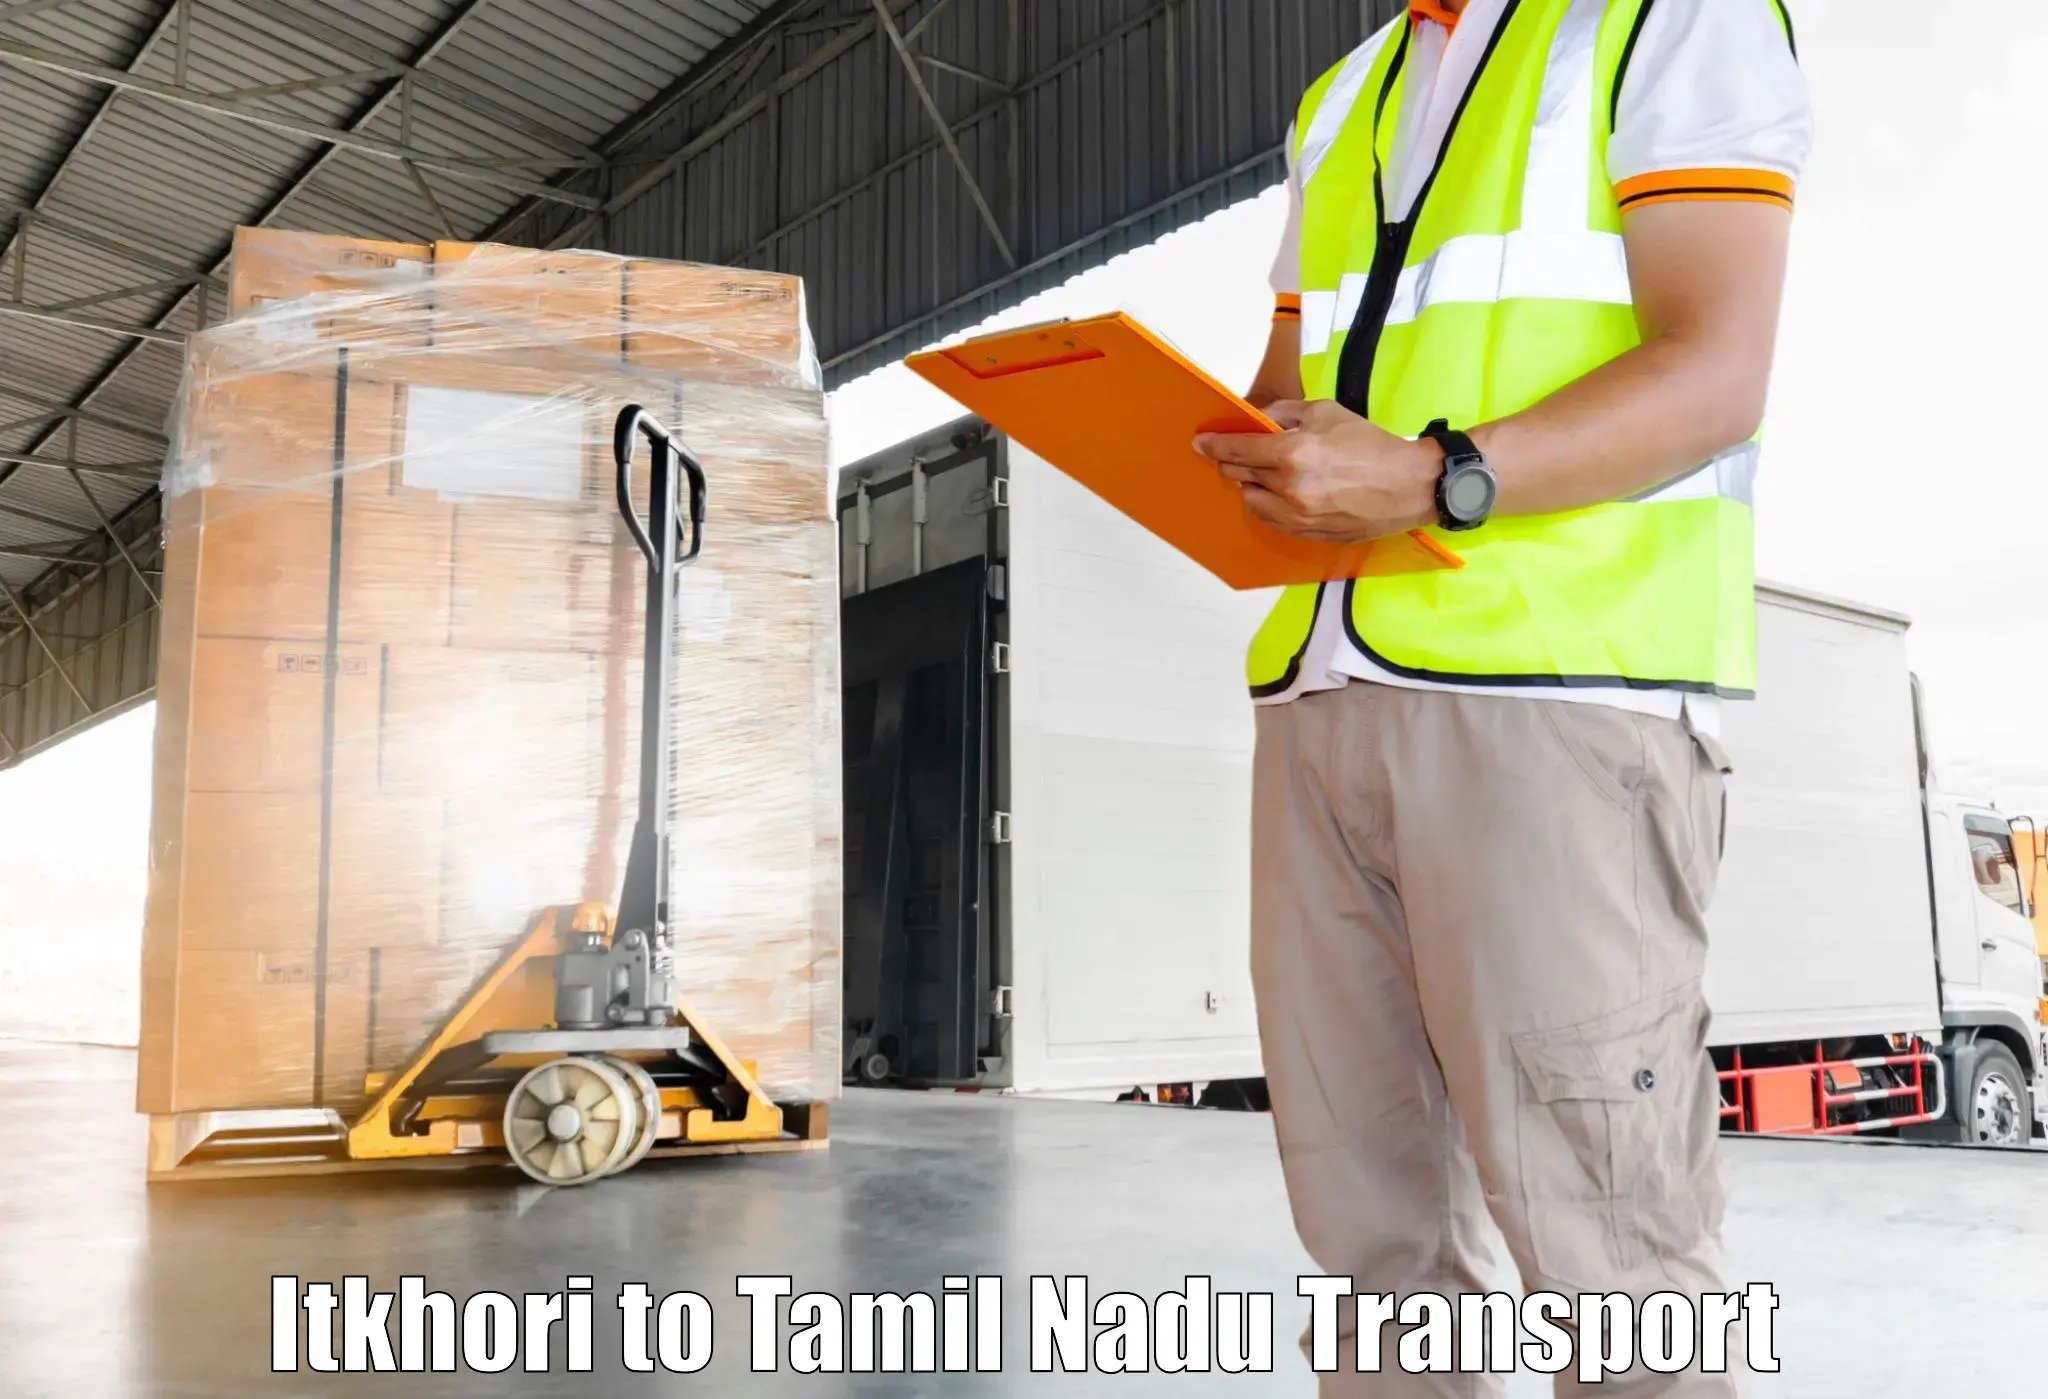 Cargo transportation services Itkhori to Vellore Institute of Technology